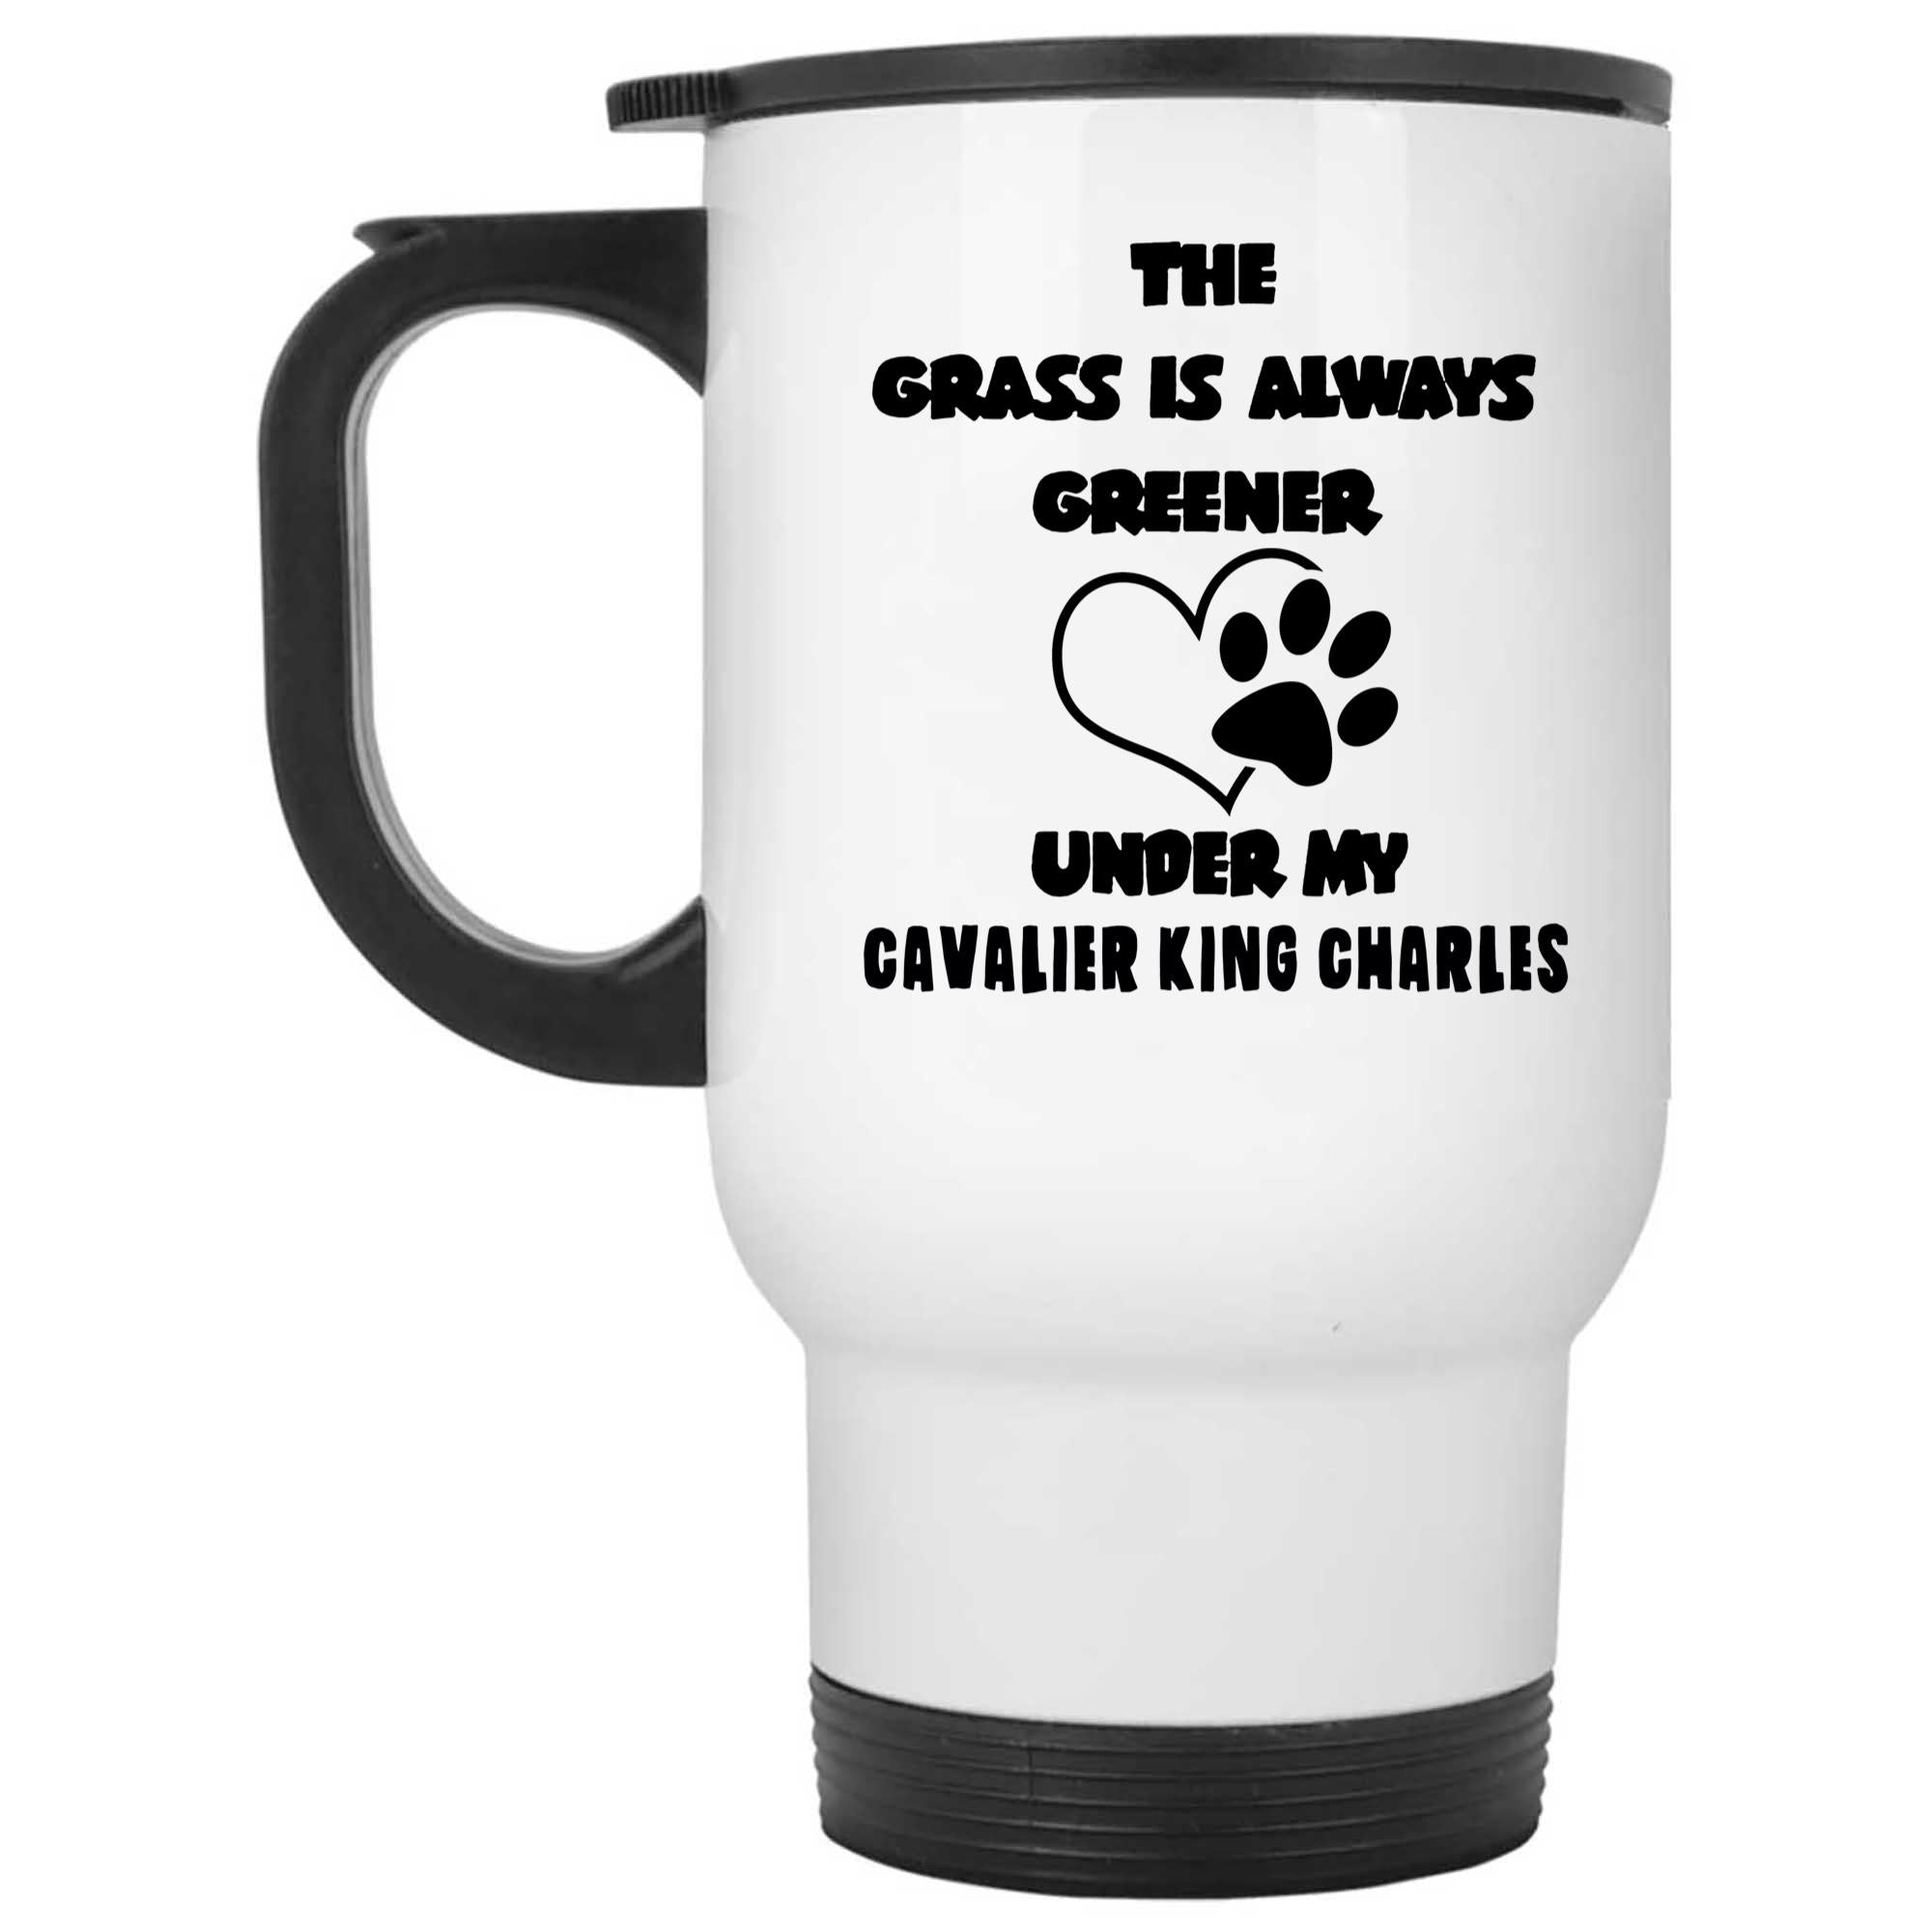 Skitons Funny Ceramic Novelty Coffee Mug The Grass Is Always Greener Under My Cavalier King Charles Dog Funny Sarcastic, Dog Lover itsWk4q